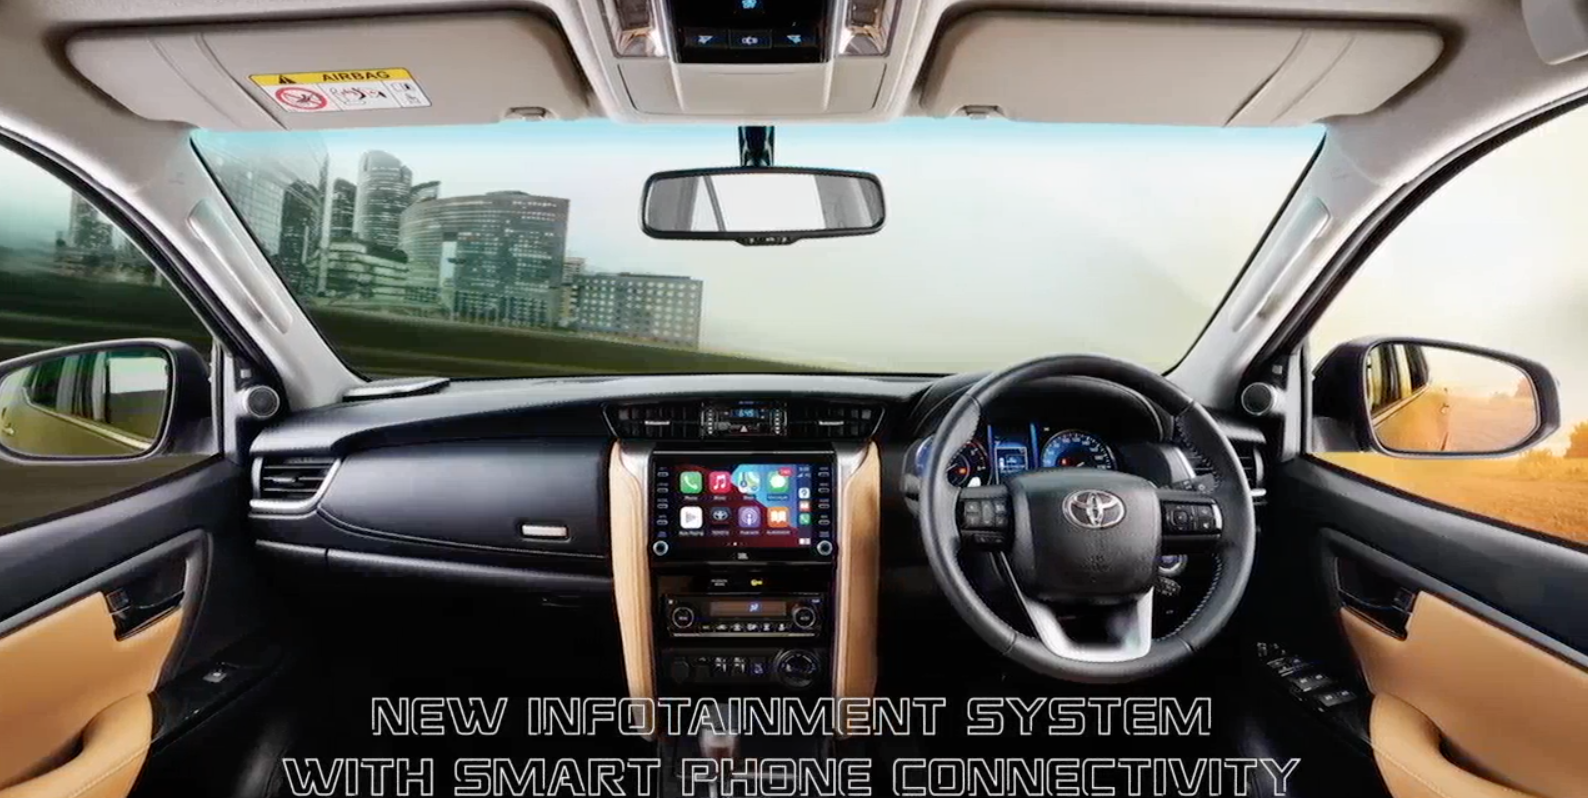 <p>Apart from a bump in power/torque figures on the 2.8L diesel to make it best-in-class, the new&nbsp;Toyota&nbsp;Fortuner adds in some key creature comforts including new infotainment with smartphone integration, &amp; ventilated front seats.</p>